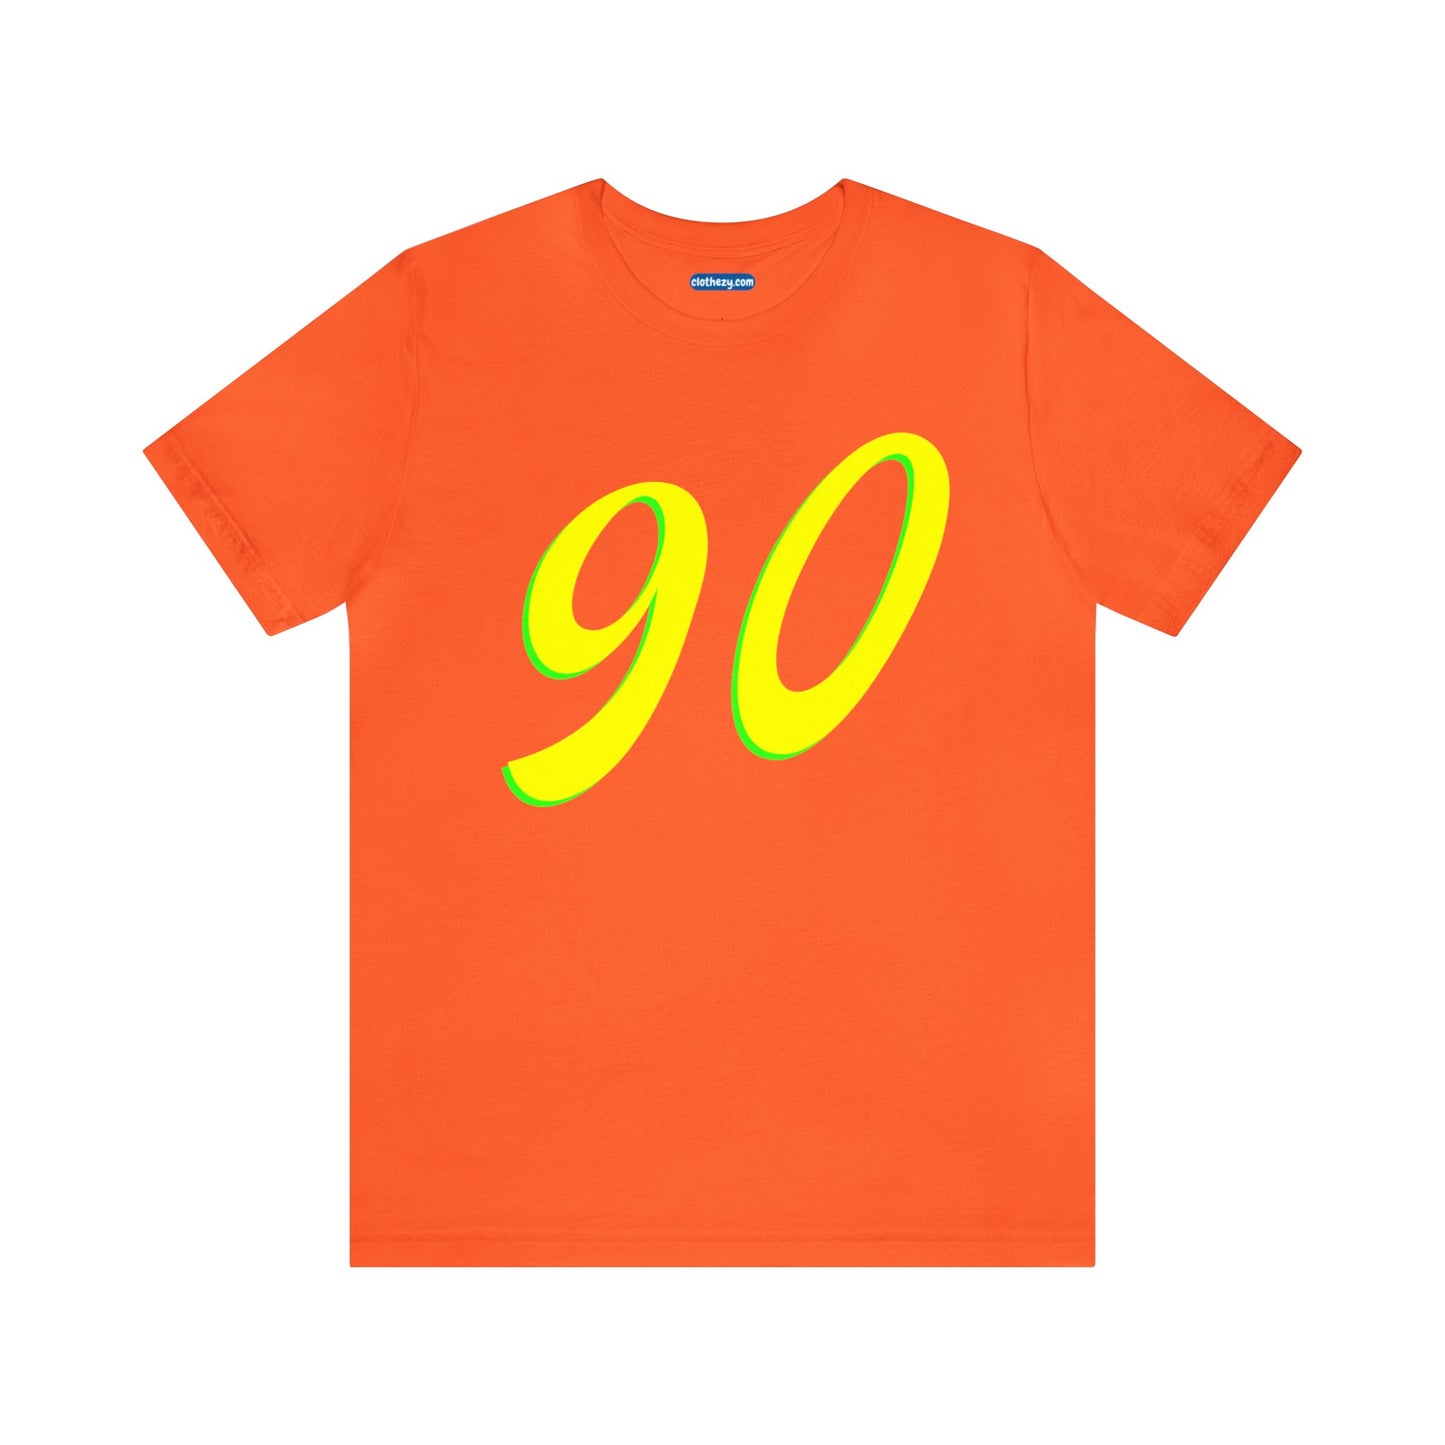 Number 90 Design - Soft Cotton Tee for birthdays and celebrations, Gift for friends and family, Multiple Options by clothezy.com in Pink Size Small - Buy Now